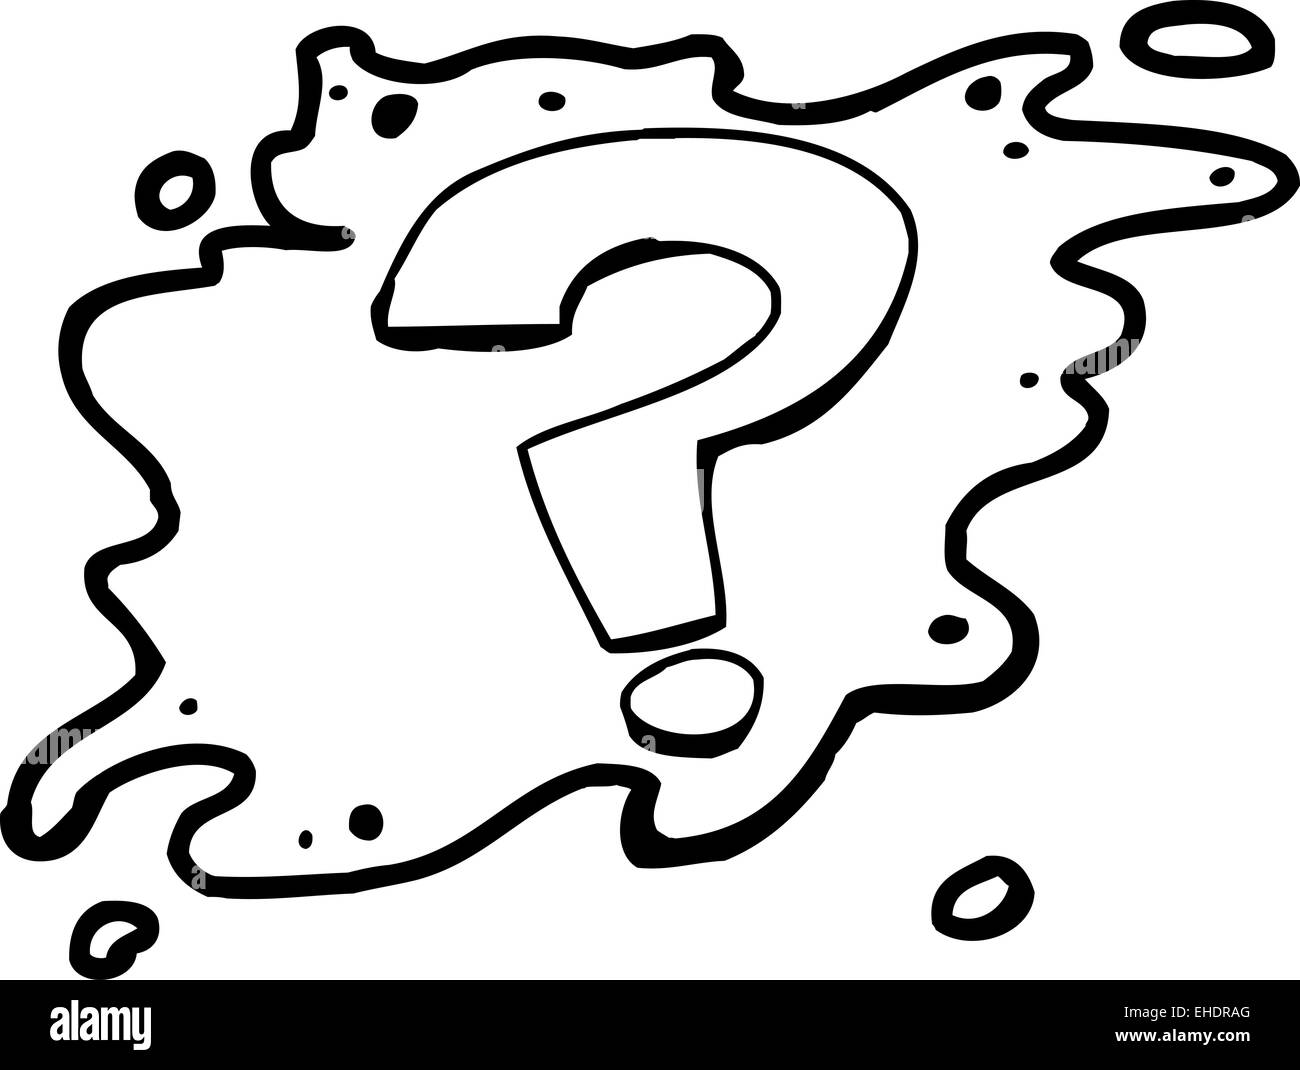 Outlined hand drawn question mark cartoon over white Stock Photo